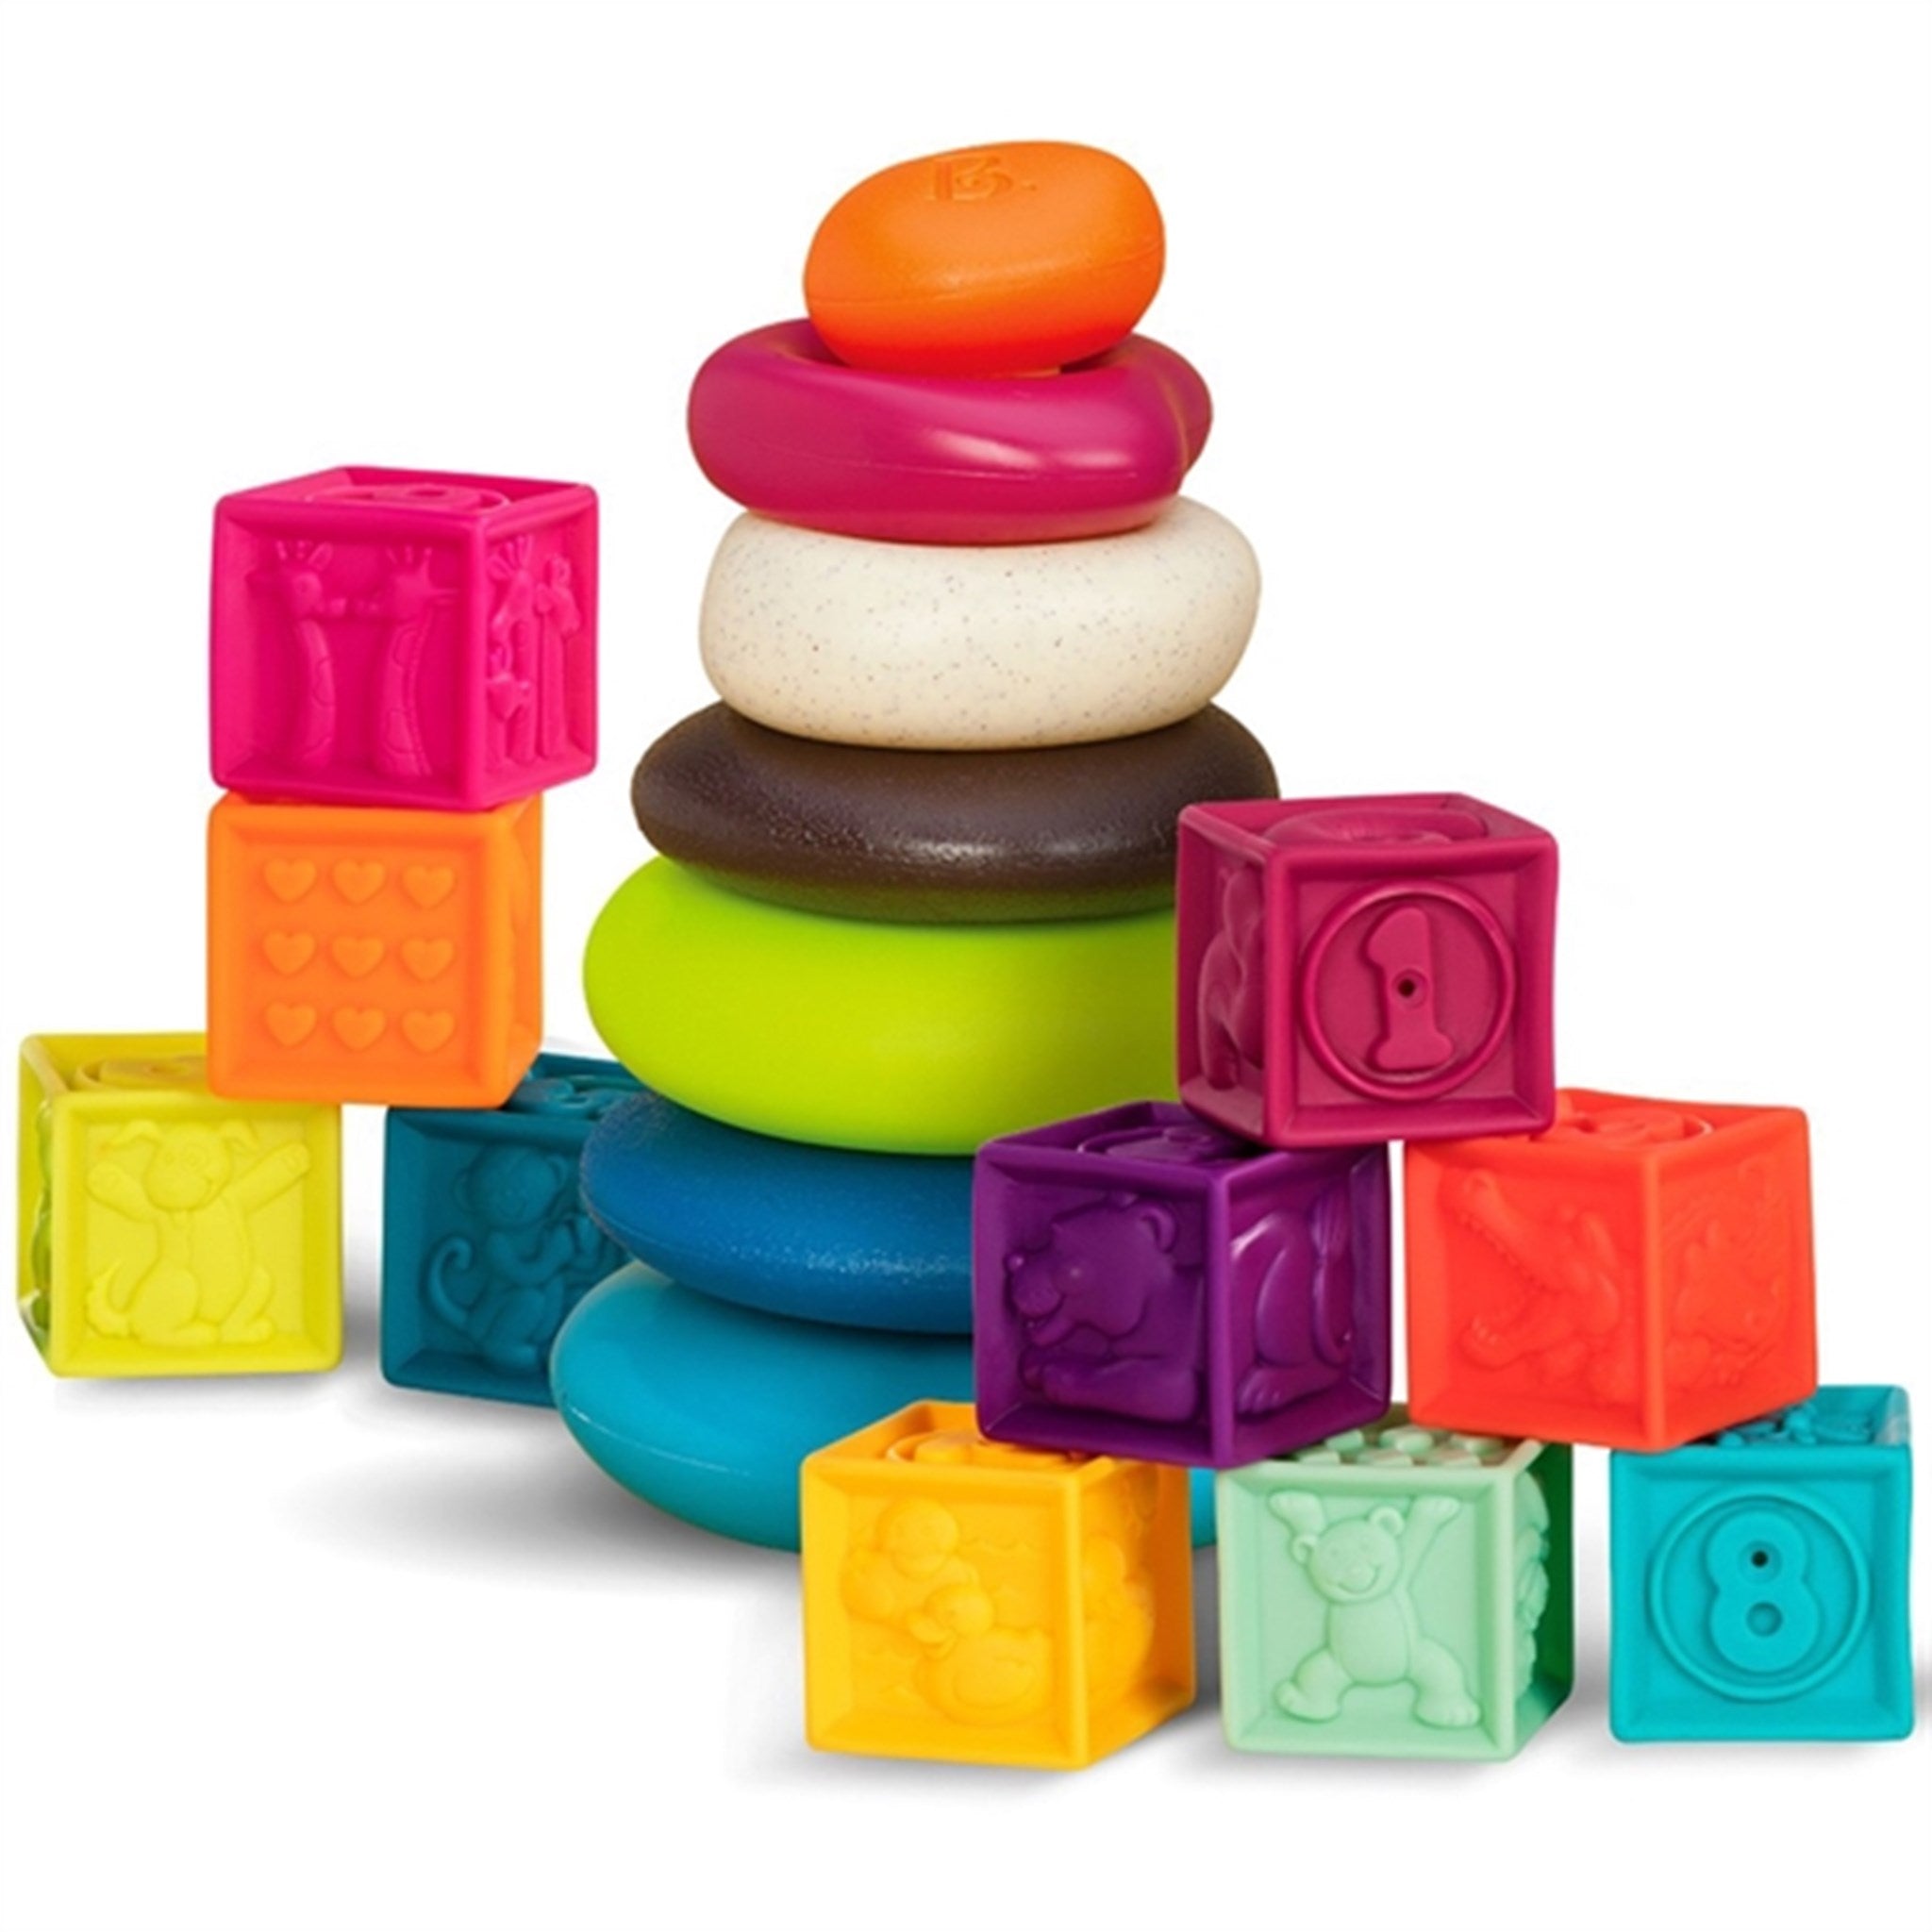 B-toys Building Blocks And Stacking Toy